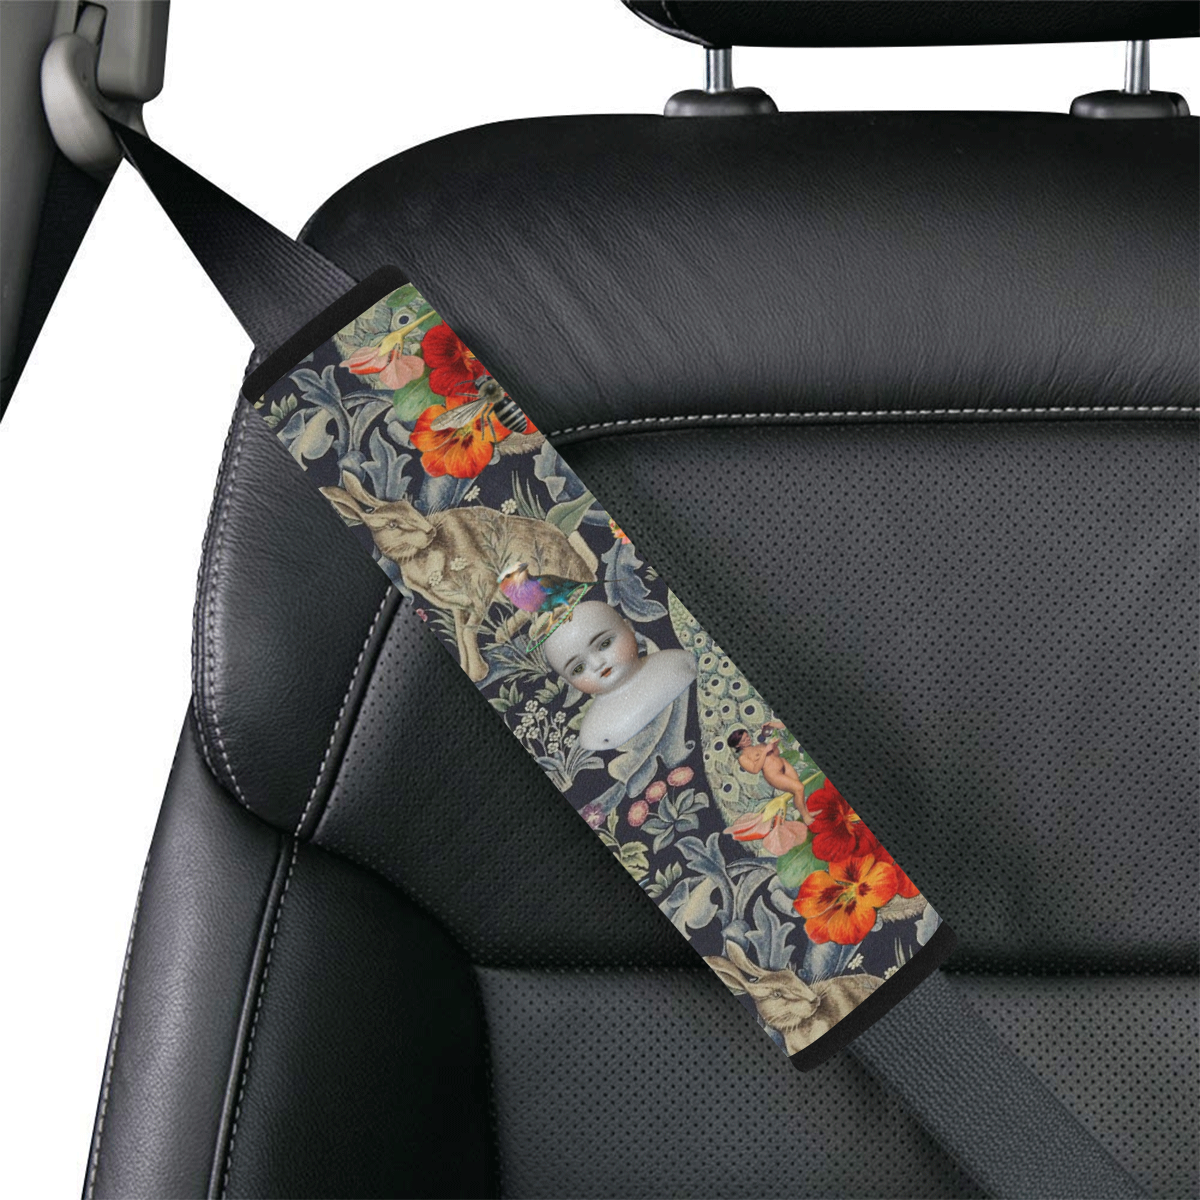 And Another Thing (doll) Car Seat Belt Cover 7''x12.6''